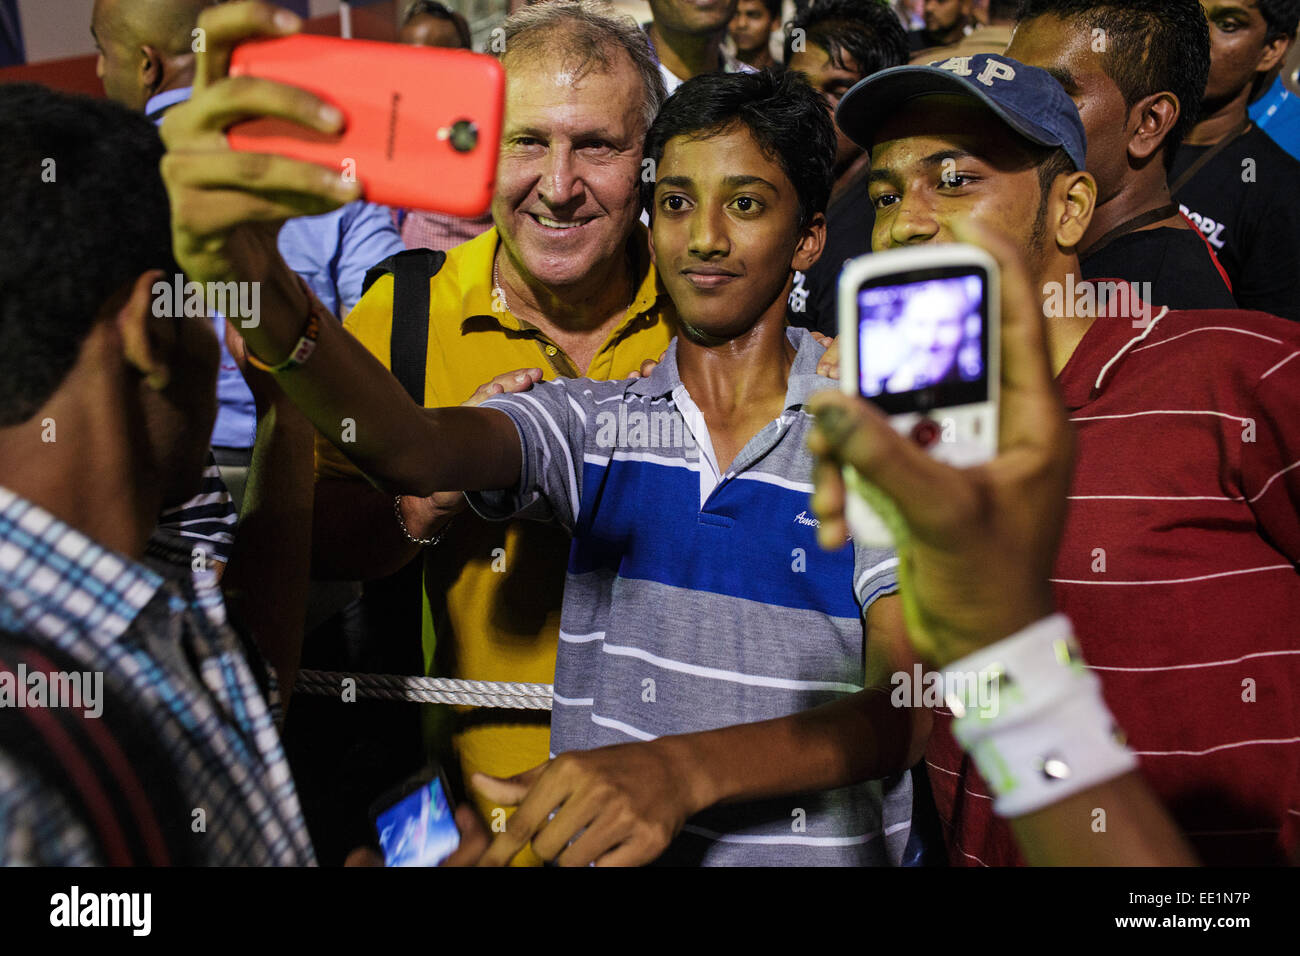 Zico (Arthur Antunes Coimbra) poses to pictures with young Indian fans after Indian Super League football match in Margao, Goa Stock Photo